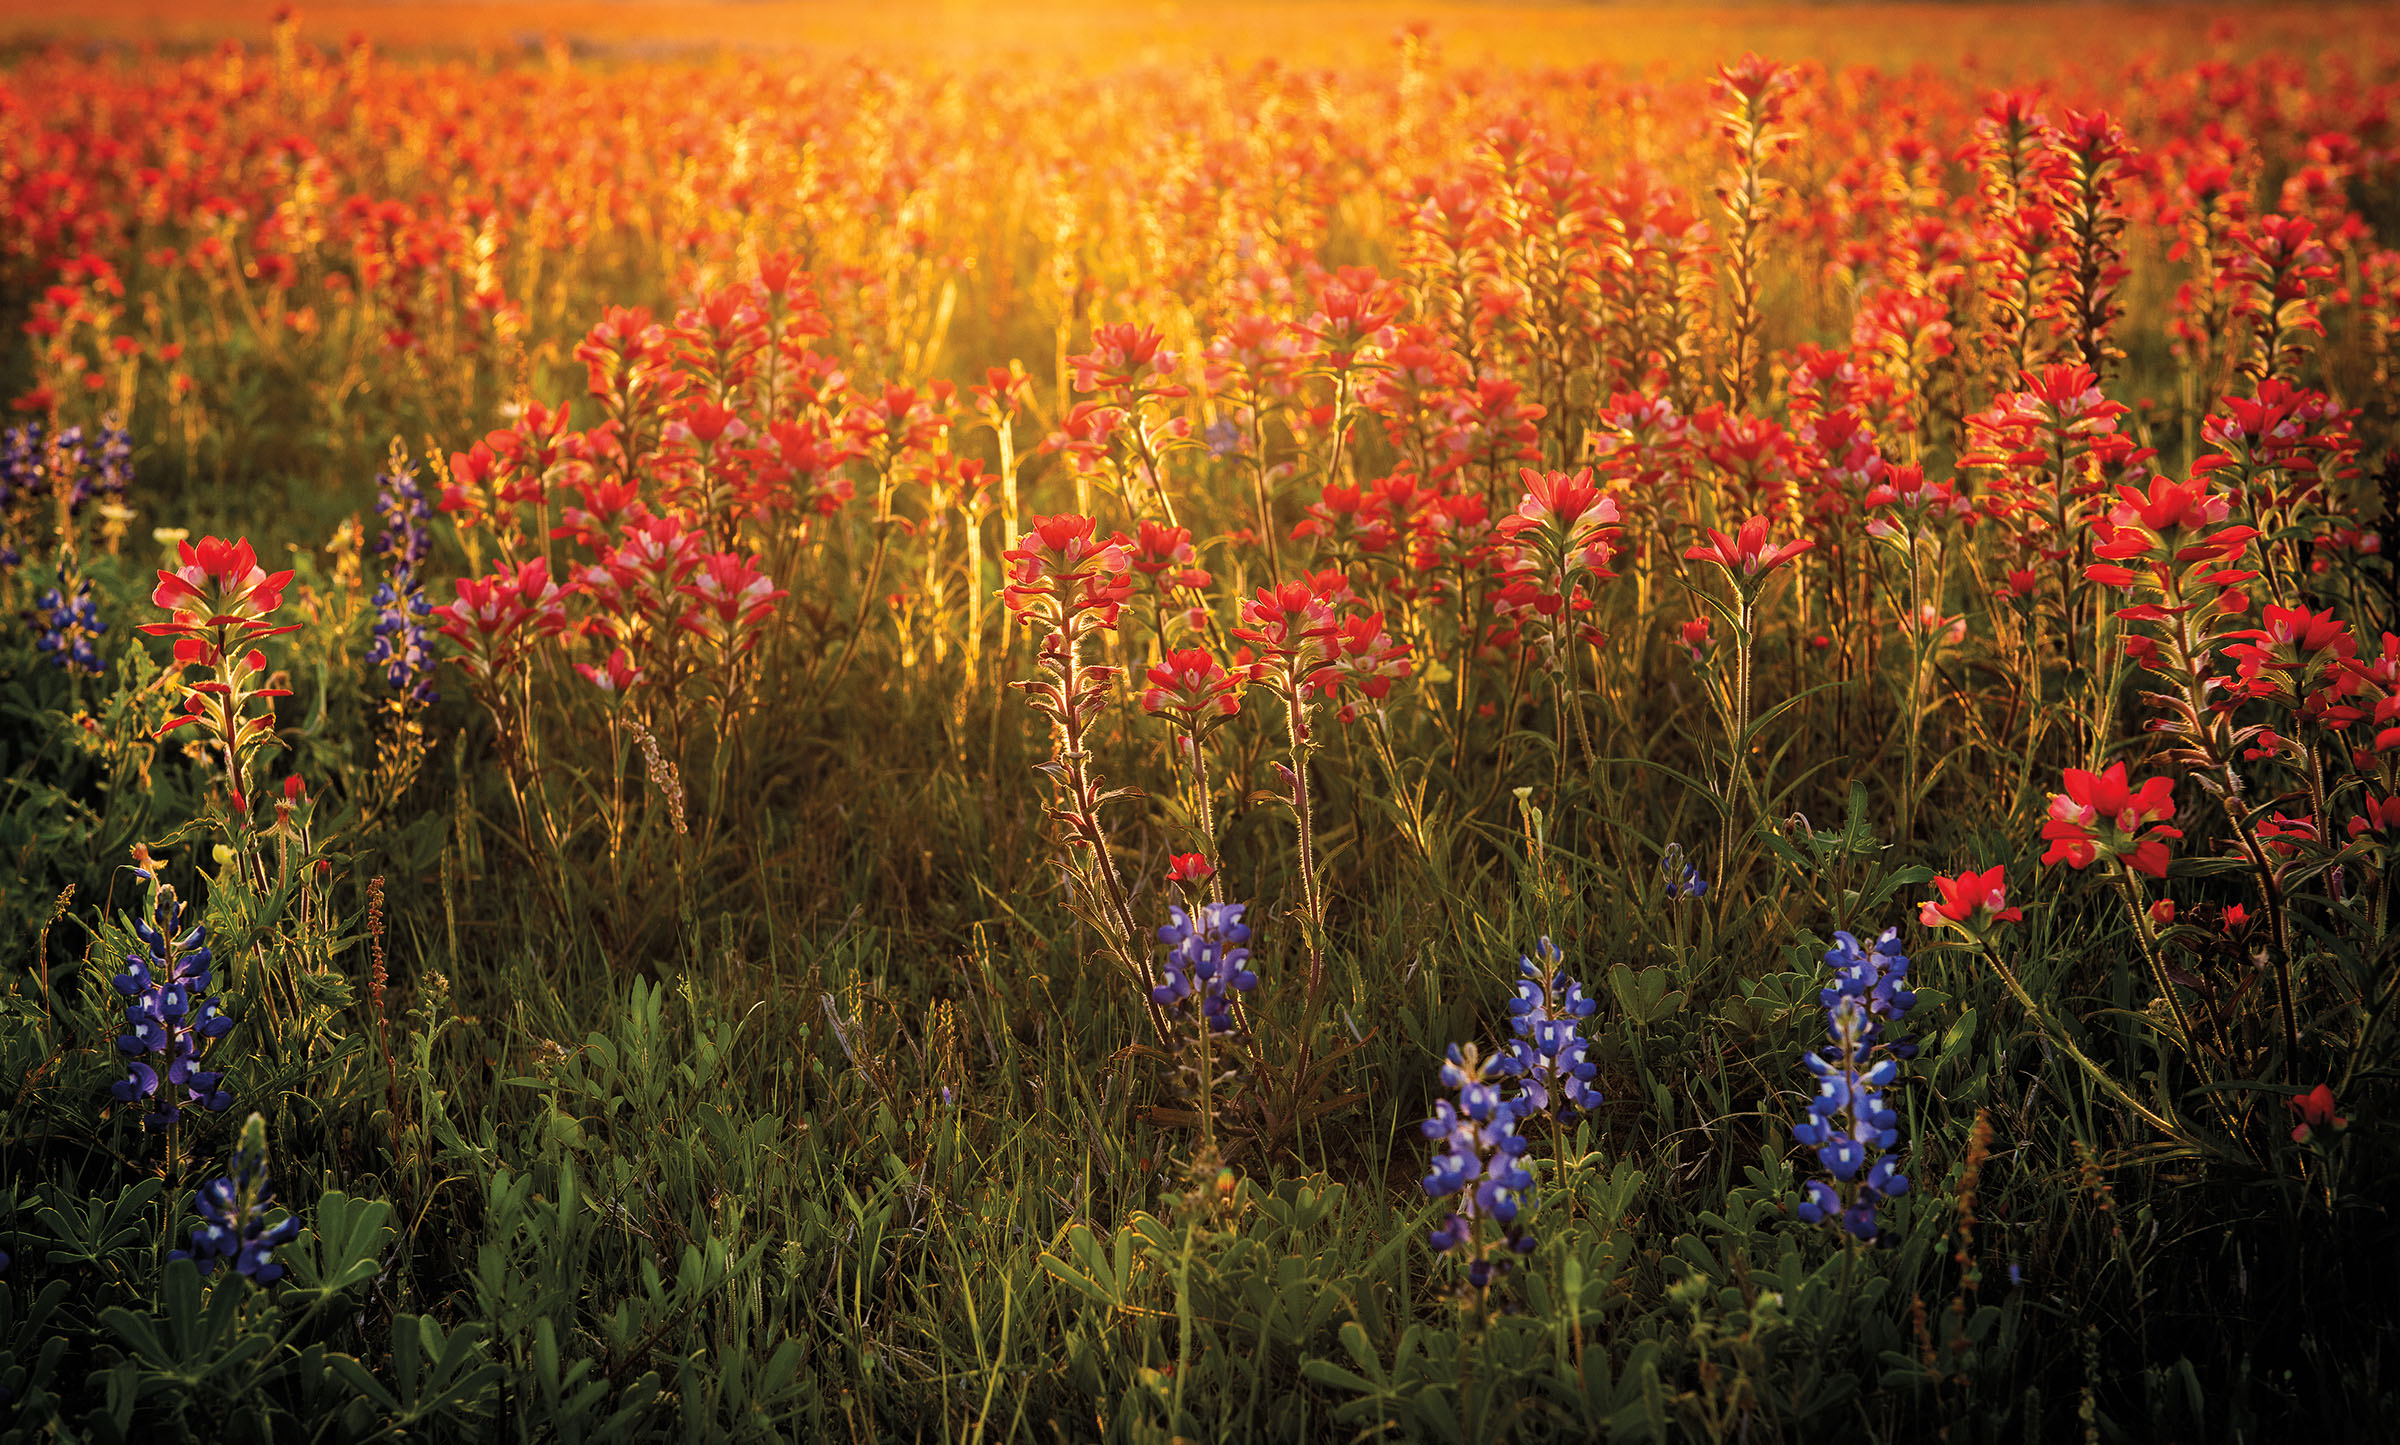 A wide photo of bright red flowers in a field with golden light